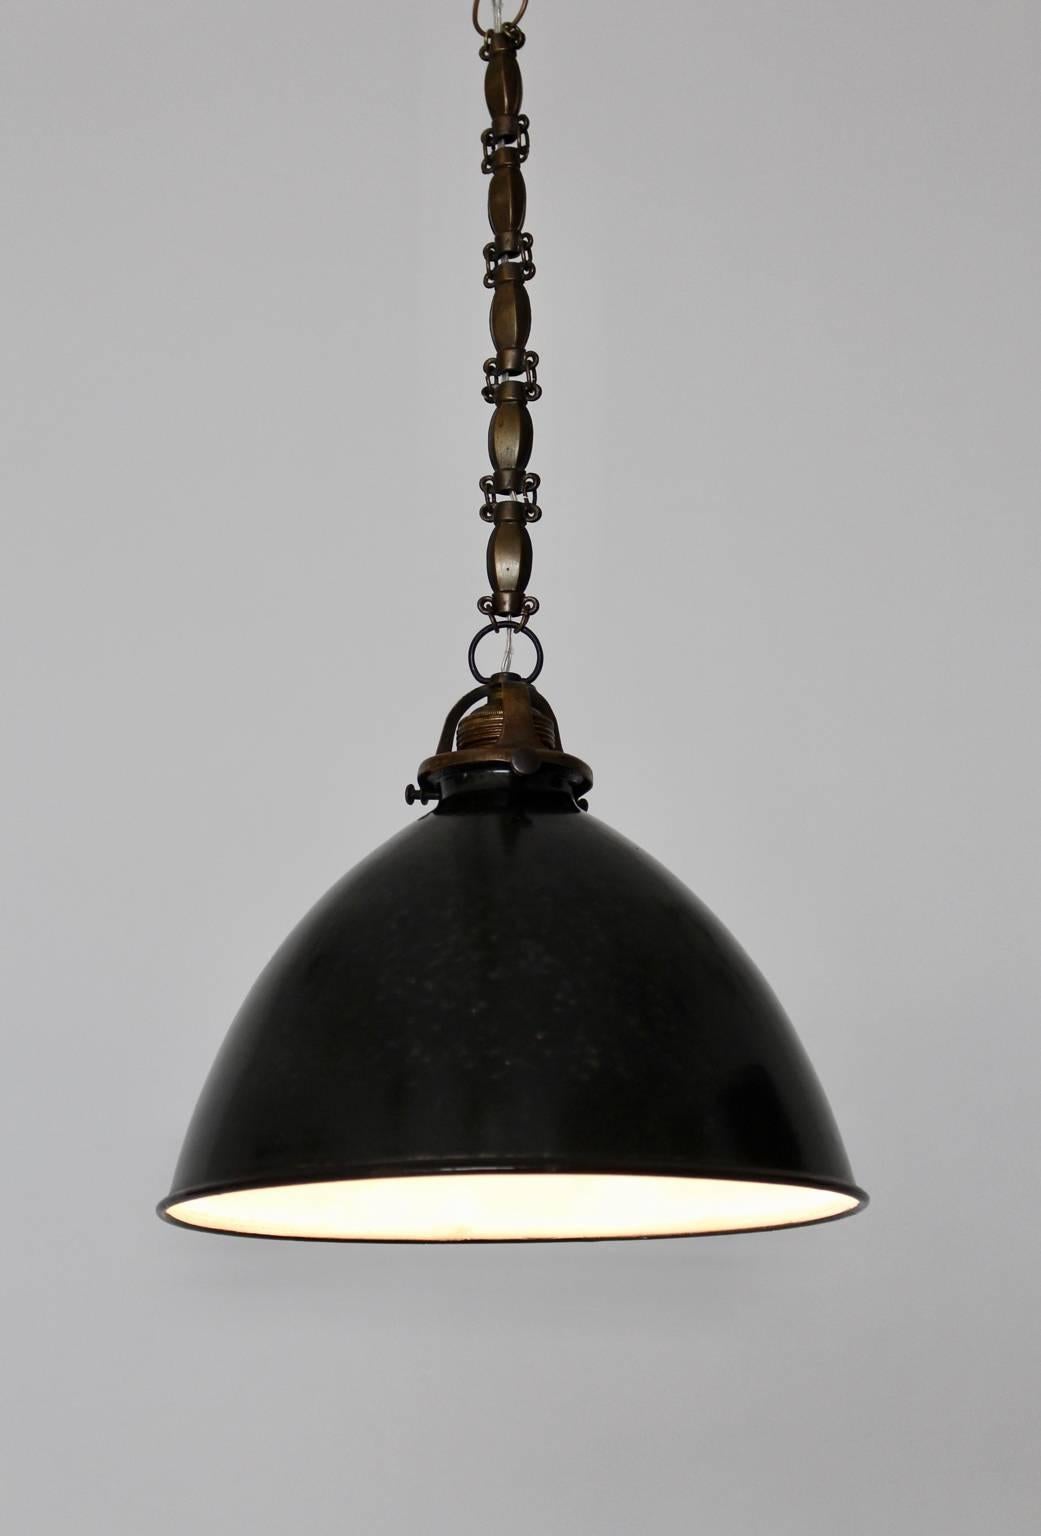 Bauhaus Black and White Email Metal Brass Vintage Hanging Lamps 1920s Set of Six For Sale 3